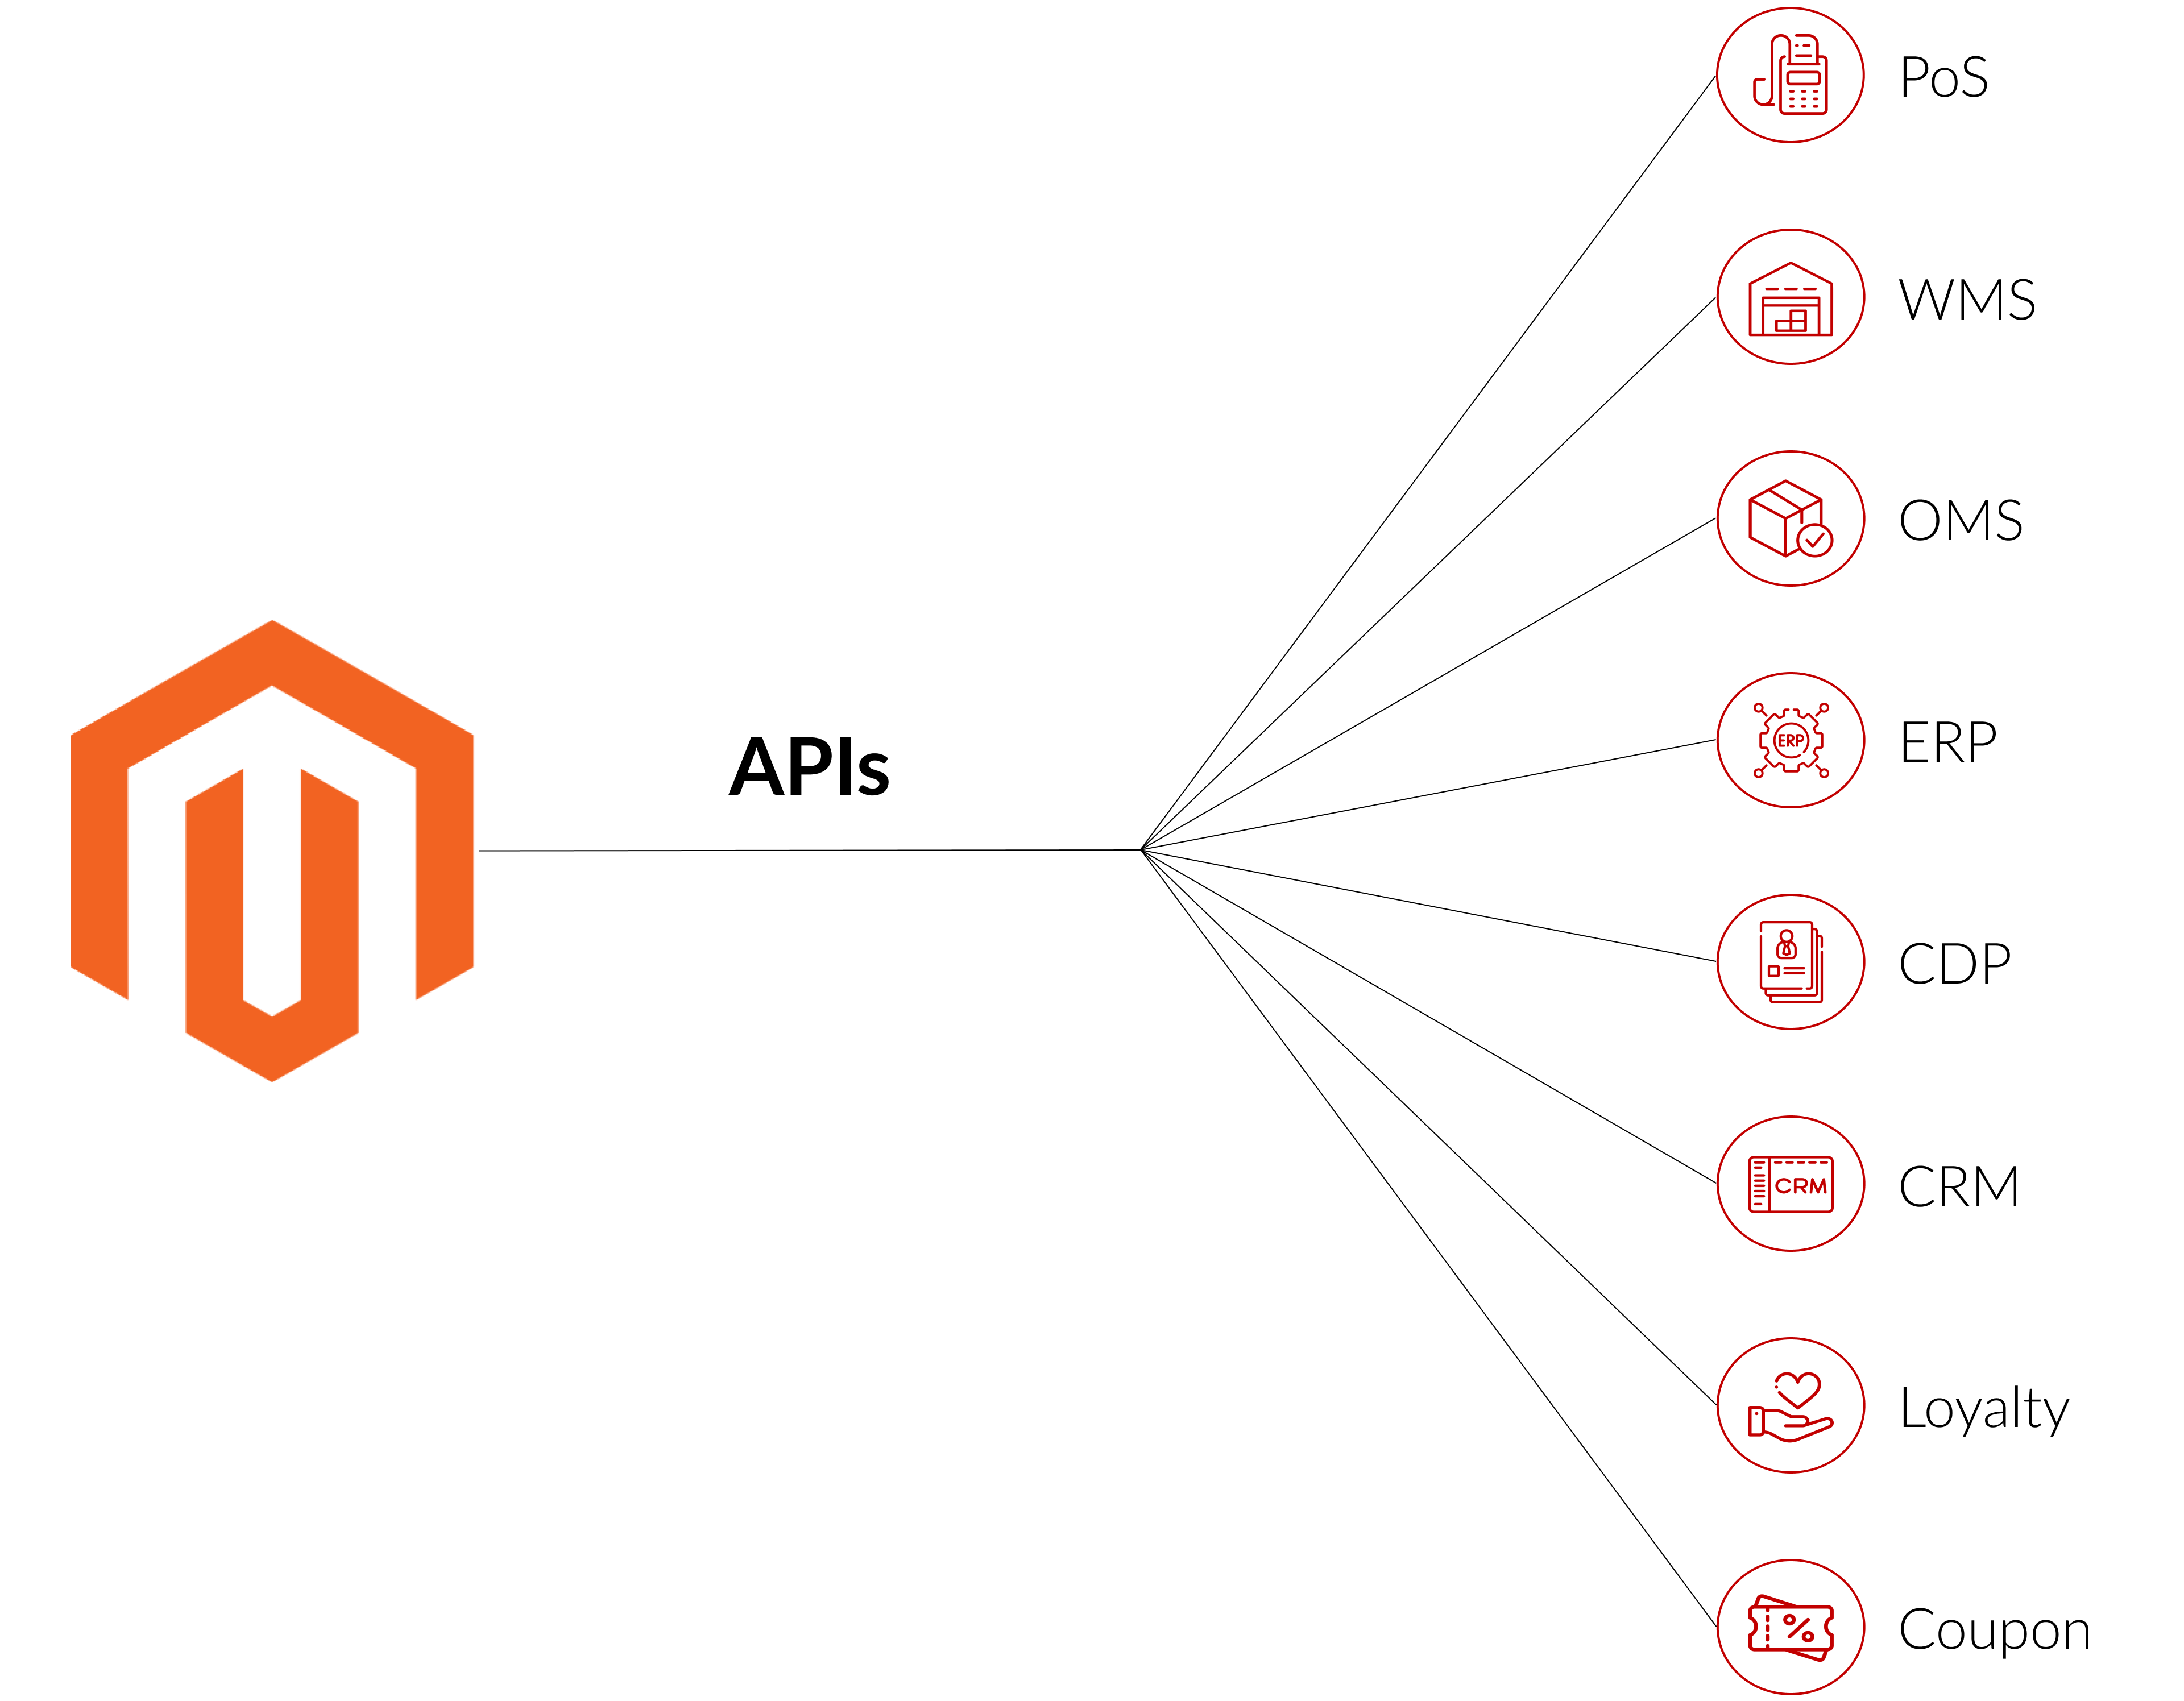 ITC can connect your single back-end Magento with all your systems, including POS, WMS, OMS, ERP, E-Commerce platform, CDP, CRM, Loyalty, and Coupon, via sets of APIs